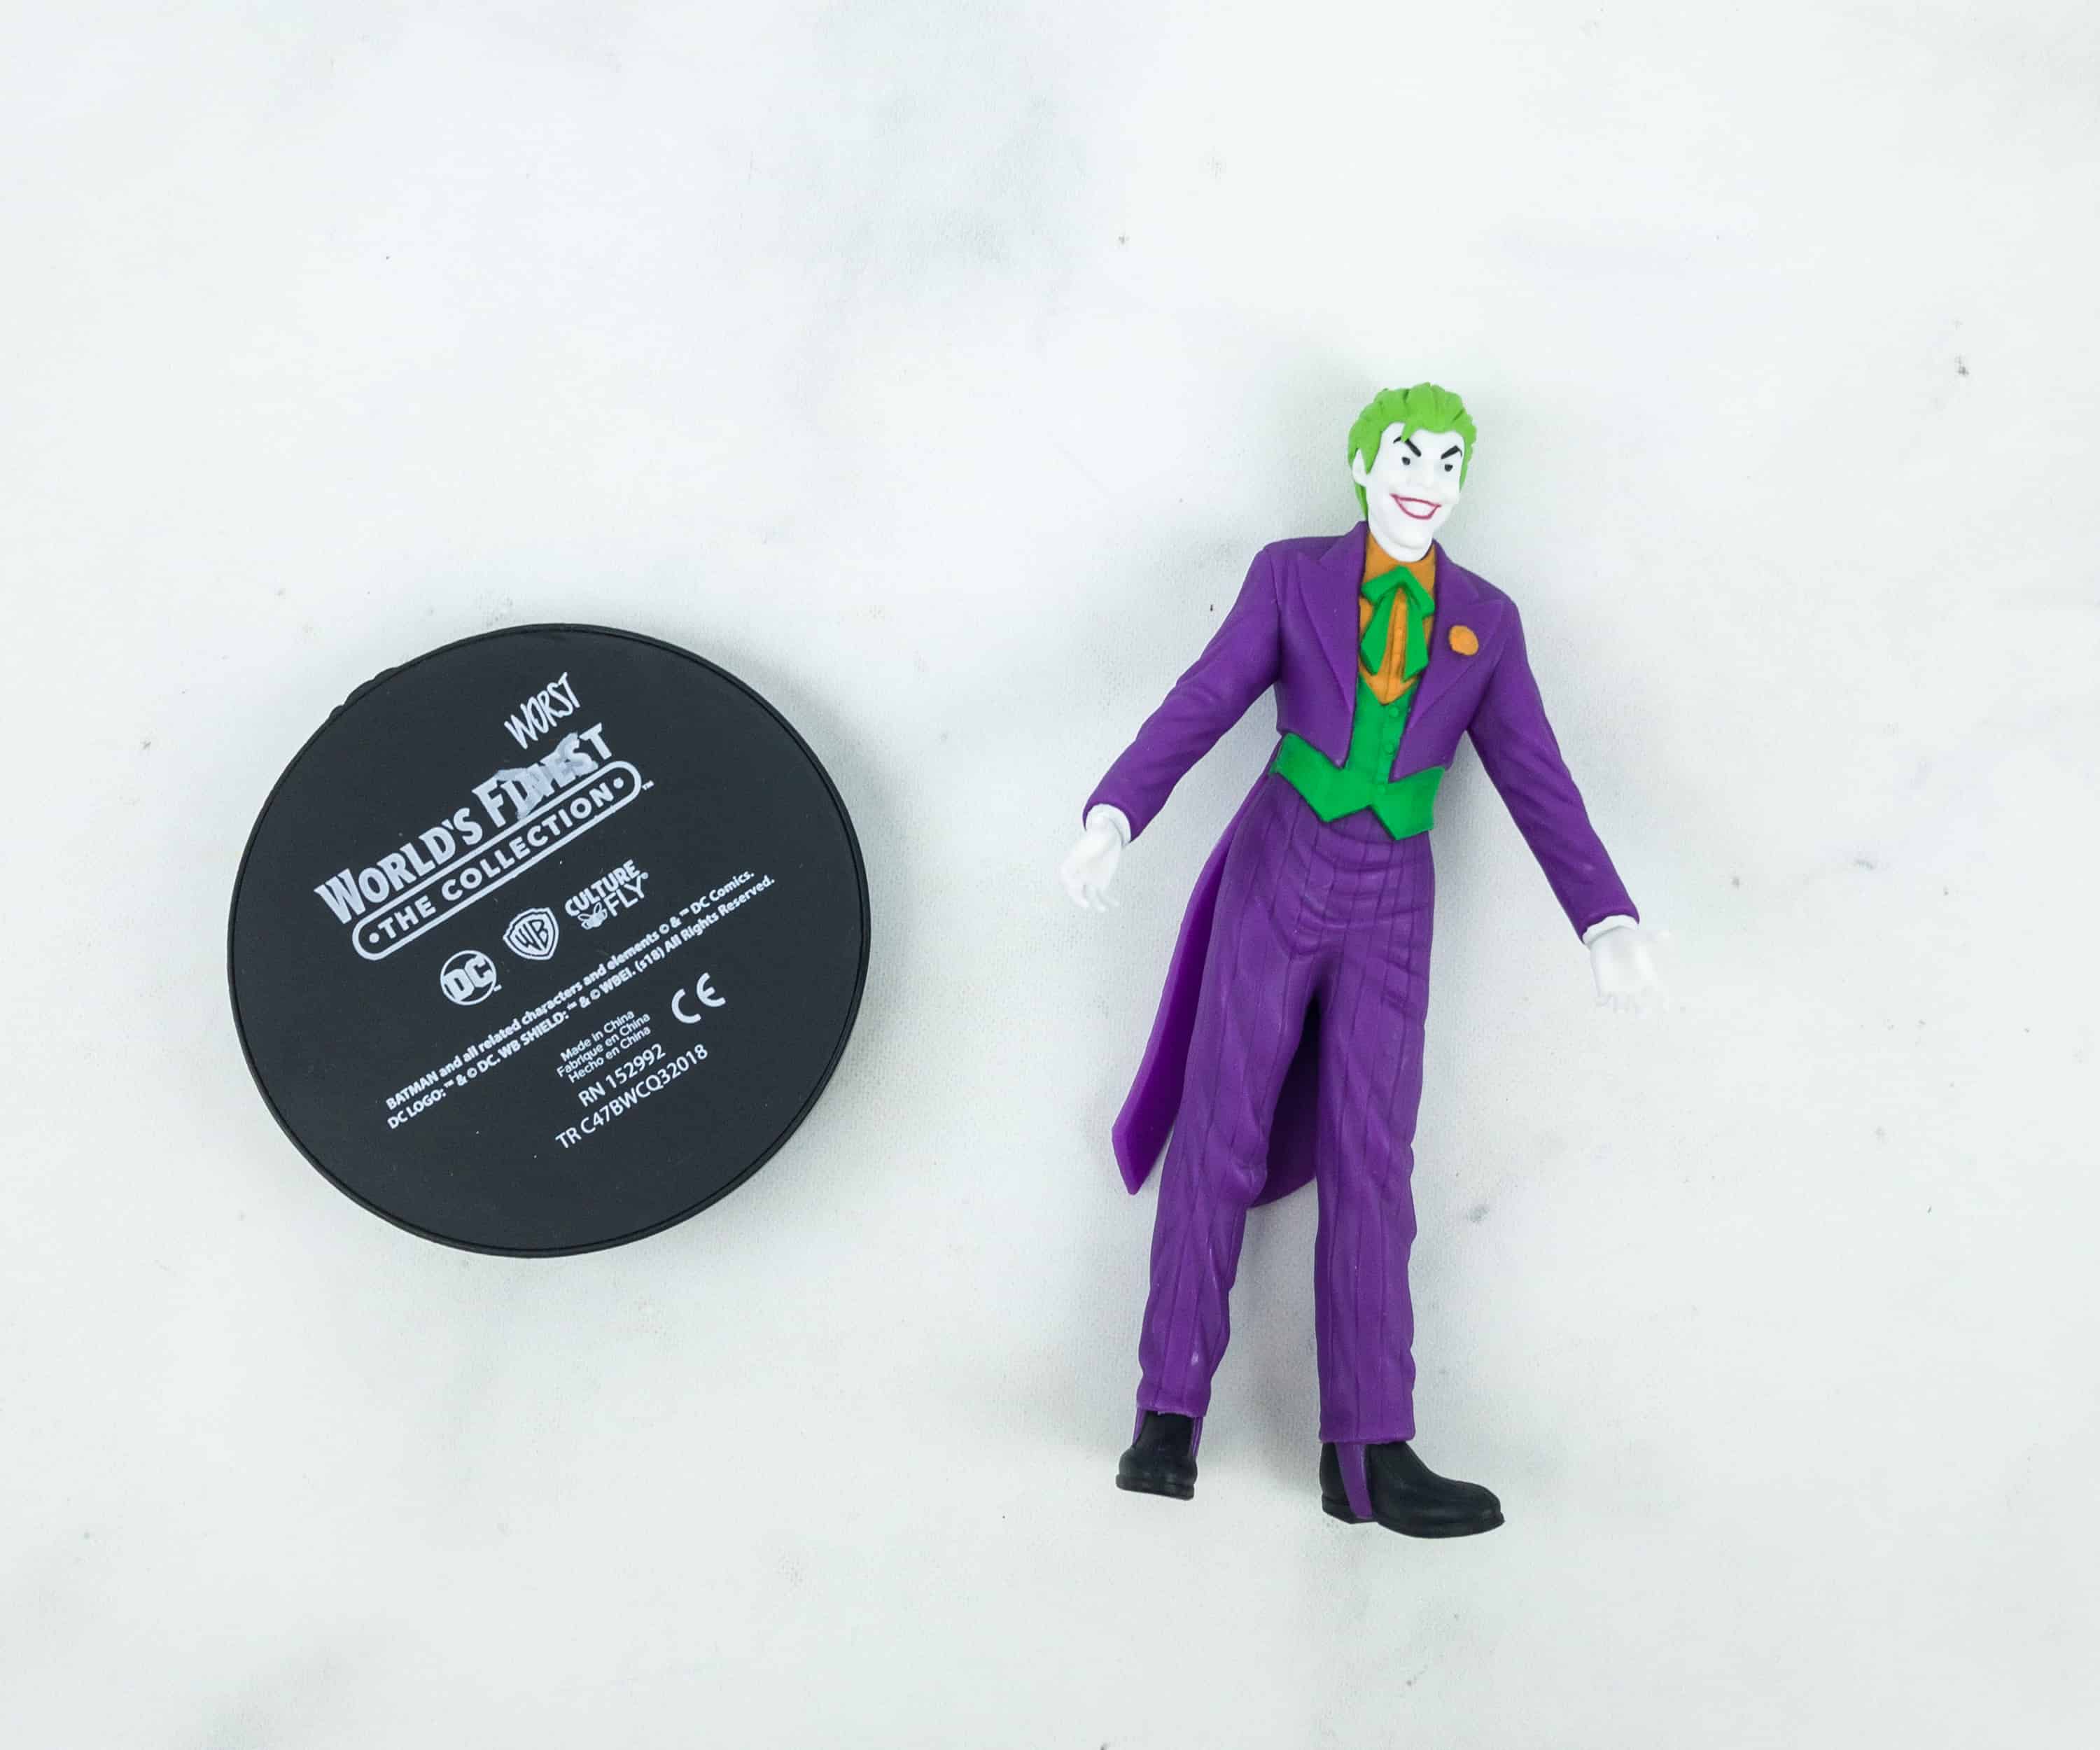 DC Comics The World's Finest Collection Joker Vinyl CultureFly Exclusive NEW 